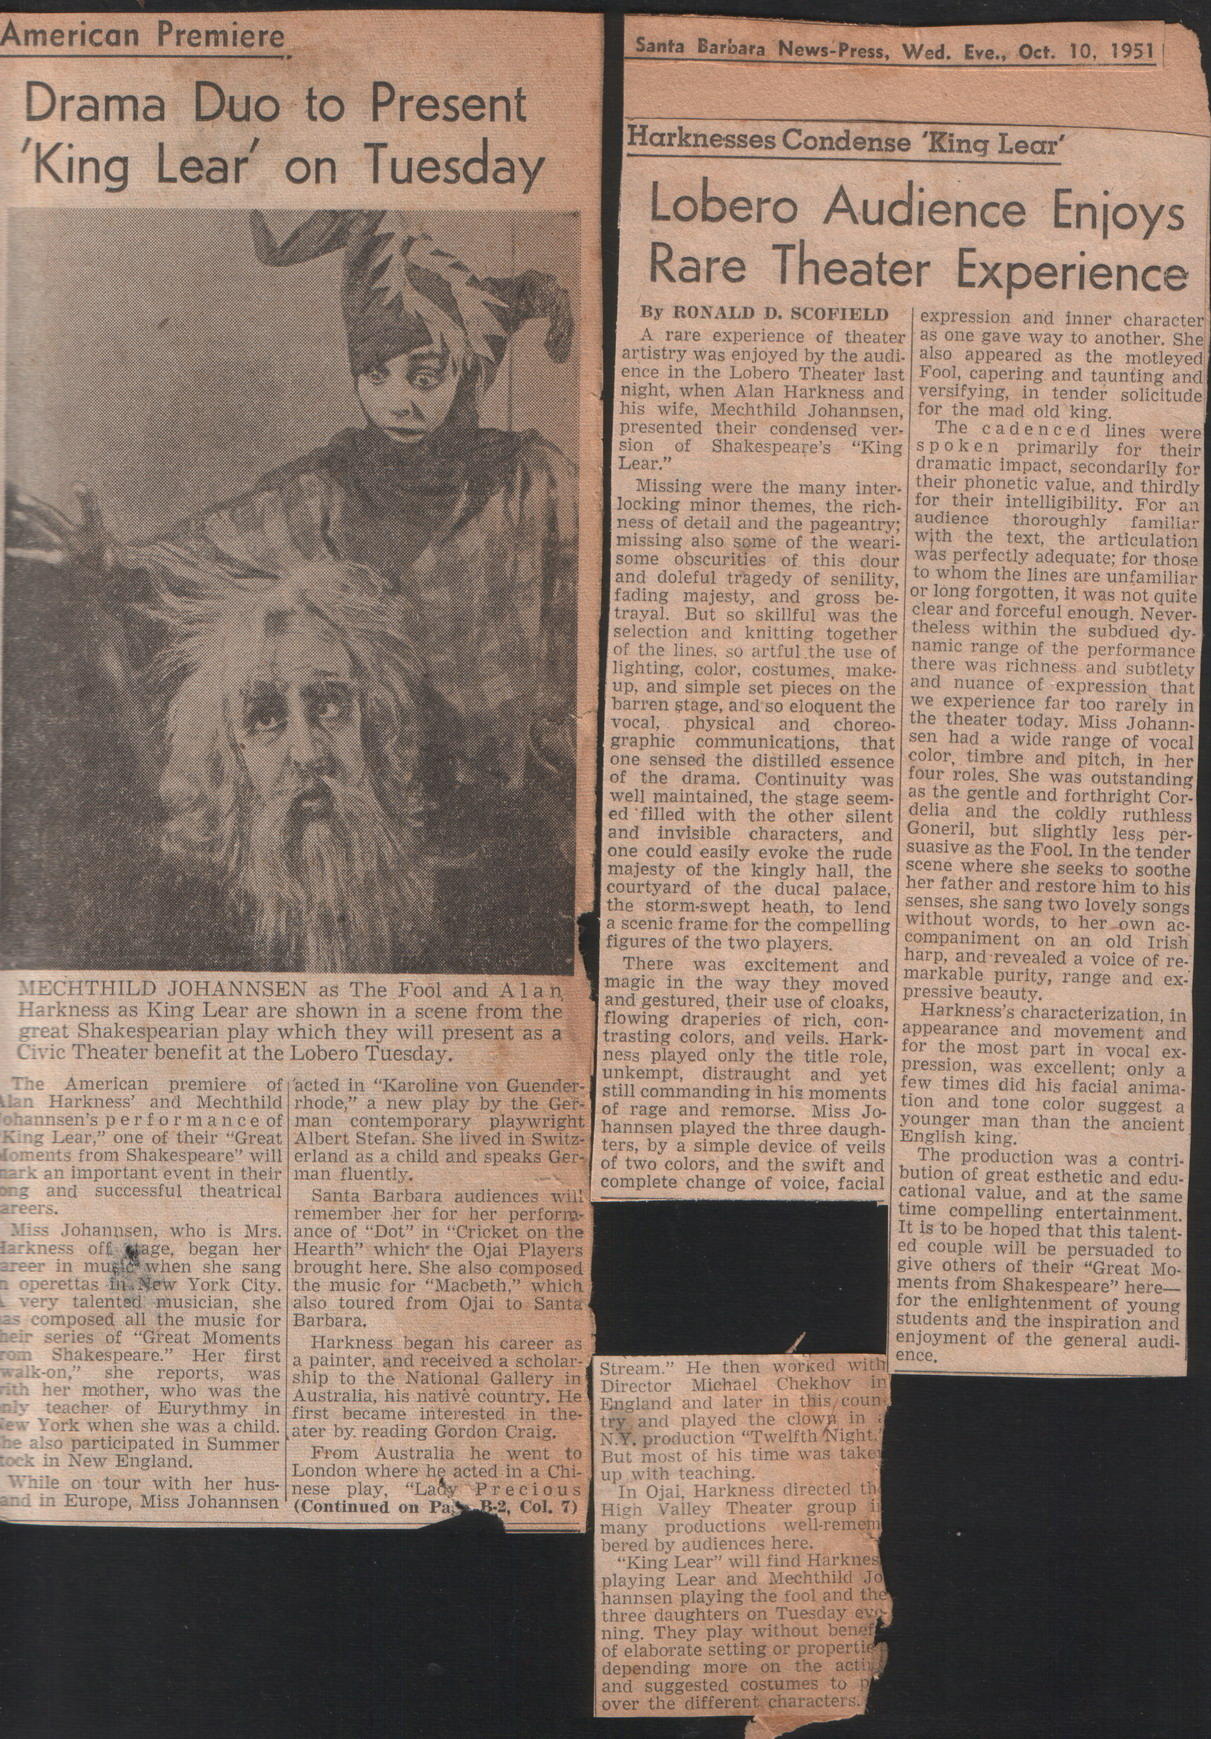 Lear in America, text: 
														American Premiere
Drama Duo to Present
'King Lear on Tuesday
Santa Barbara News-Press, Wed. Eve., Oct. 10, 1951
Harknesses Condense 'King Lear' Lobero Audience Enjoys
Rare Theater Experience
By RONALD D. SCOFIELD expression and inner character A rare experience of theater as one gave way to another. She
artistry was enjoyed by the audi.
also appeared as the motleyed ence in the Lobero Theater last Fool, capering and taunting and night, when Alan Harkness and versifying, in tender solicitude his wife, Mechthild Johannsen, for the mad old king.
presented their condensed ver
The cadenced lines were!
sion of
Shakespeare's
"King spoken primarily for their
bear.
dramatic impact, secondarily for
Missing were the many inter.
their phonetic value, and thirdly
locking minor themes, the rich.
for their intelligibility. For ail
ness of detail and the pageantry;
audience thoroughly
missing also some of the weari.
familiar
with the text, the articulation
some obscurities of this dour was perfectly adequate; for those
to whom the lines are unfamiliar
and doleful tragedy of senility, or long forgotten, it was not quite fading majesty, and gross be- trayal. But so skillful was the clear and forceful enough. Never.
selection and knitting together
theless within the subdued dy. of the lines, so artful the use of namic range of the performance
lighting, color, costumes, make.
there was richness and subtlety up, and simple set pieces on the and nuance of expression that barren stage, and so eloquent the we experience far too rarely in
vocal, physical and
choreo- the theater today. Miss Johann. graphic communications, that sen had a wide range of vocal one sensed the distilled essence color, timbre and pitch, in her of the drama. Continuity was four roles. She was outstanding
well maintained, the stage seem-
as the gentle and forthright Cor ed filled with the other silent delia and the coldly ruthless
and invisible characters,
and
Goneril, but slightly less per- one could easily evoke the rude suasive as the Fool. In the tender majesty of the kingly hall, the scene where she seeks to soothe courtyard of the ducal palace, her father and restore him to his the storm-swept heath, to lend senses, she sang two lovely songs a scenic frame for the compelling without words, to her own ac-
figures of the two players.
companiment on an old Irish
There was excitement and
harp, and revealed a voice of re
MECHTHILD JOHANNSEN as The Fool and Alan magic in the way they moved
markable purity, range and ex-
Harkness as King Lear are shown in a scene from the and gestured, their use of cloaks,
pressive beauty.
flowing draperies of rich, con-
Harkness's characterization, in
great Shakespearian play which they will present as a trasting colors, and veils. Hark-
appearance and movement and
Civic Theater benefit at the Lobero Tuesday.
ness played only the title role, for the most part in vocal ex-
pression, was excellent; only a
The American premiere of acted in "Karoline von Guender.
unkempt, distraught and yet few times did his facial anima- Ilan Harkness' and Mechthild rhode." a new play by the Get
ohannsen's performance of man contemporary plavwright still commanding in his moments tion and tone color suggest a
of rage and remorse. Miss Jo
King Lear," one of their "Great Albert Stefan. She lived in Switz- hannsen played the three daugh.
younger man than the ancient
ters, by a simple device of veils
foments from Shakespeare" will erland as a child and speaks Ger of two colors, and the swift and
English king.
The production was a contri- nark an important event in their man fluently.
ong and successful theatrical
complete change of voice, facial
bution of great esthetic and edu.
Santa Barbara audiences will
cational value, and at the same
areers.
remember her for her perform-
time compelling entertainment.
Miss Johannsen, who is Mrs. ance of "Dot" in "Cricket on the
It is to be hoped that this talent-
larkness off wage, began her Hearth" which the Ojai Players
ed couple will be persuaded to
areer in music when she sang brought here. She also composed
give others of their "Great Mo-
a operettas in New York City. the music for "Macbeth," which
ments from Shakespeare" here-
very talented musician, she also toured from Ojai to Santa
for the enlightenment of young
as composed all the music for Barbara,
students and the inspiration and
heir series of "Great Moments
Harkness began his career as
enjoyment of the general audi. rom Shakespeare." Her first a painter, and received a scholar-
walk-on," she reports,
Stream." He then worked with ence,
was ship to the National Gallery in
ith her mother, who was the Australia, his native country. He
Director Michael Chekhov it
nly teacher of Eurythmy in first became interested in the
England and later in this coun
ew York when she was a child. ater by. reading Gordon Craig.
try, and played the clown in
he also participated in Summer
N.Y. production "Twelfth Night.
tock in New England.
From Australia he went to
But most of his time was take
While on tour with her hus- nese play,
London where he acted in a Chi-
"Lady Precious
up with teaching.
and in Europe, Miss Johannsen
In Ojai, Harkness directed thy
(Continued on Pay
B:2, Col. 7) High Valley Theater group many productions well-remem
bered by audiences here. "King Lear" will find Harknes playing Lear and Mechthild Jo hannsen playing the fool and the three daughters on Tuesday evs ning. They play without benar of elaborate setting or properti depending more on the actin and suggested costumes to
over the different, characters.
														